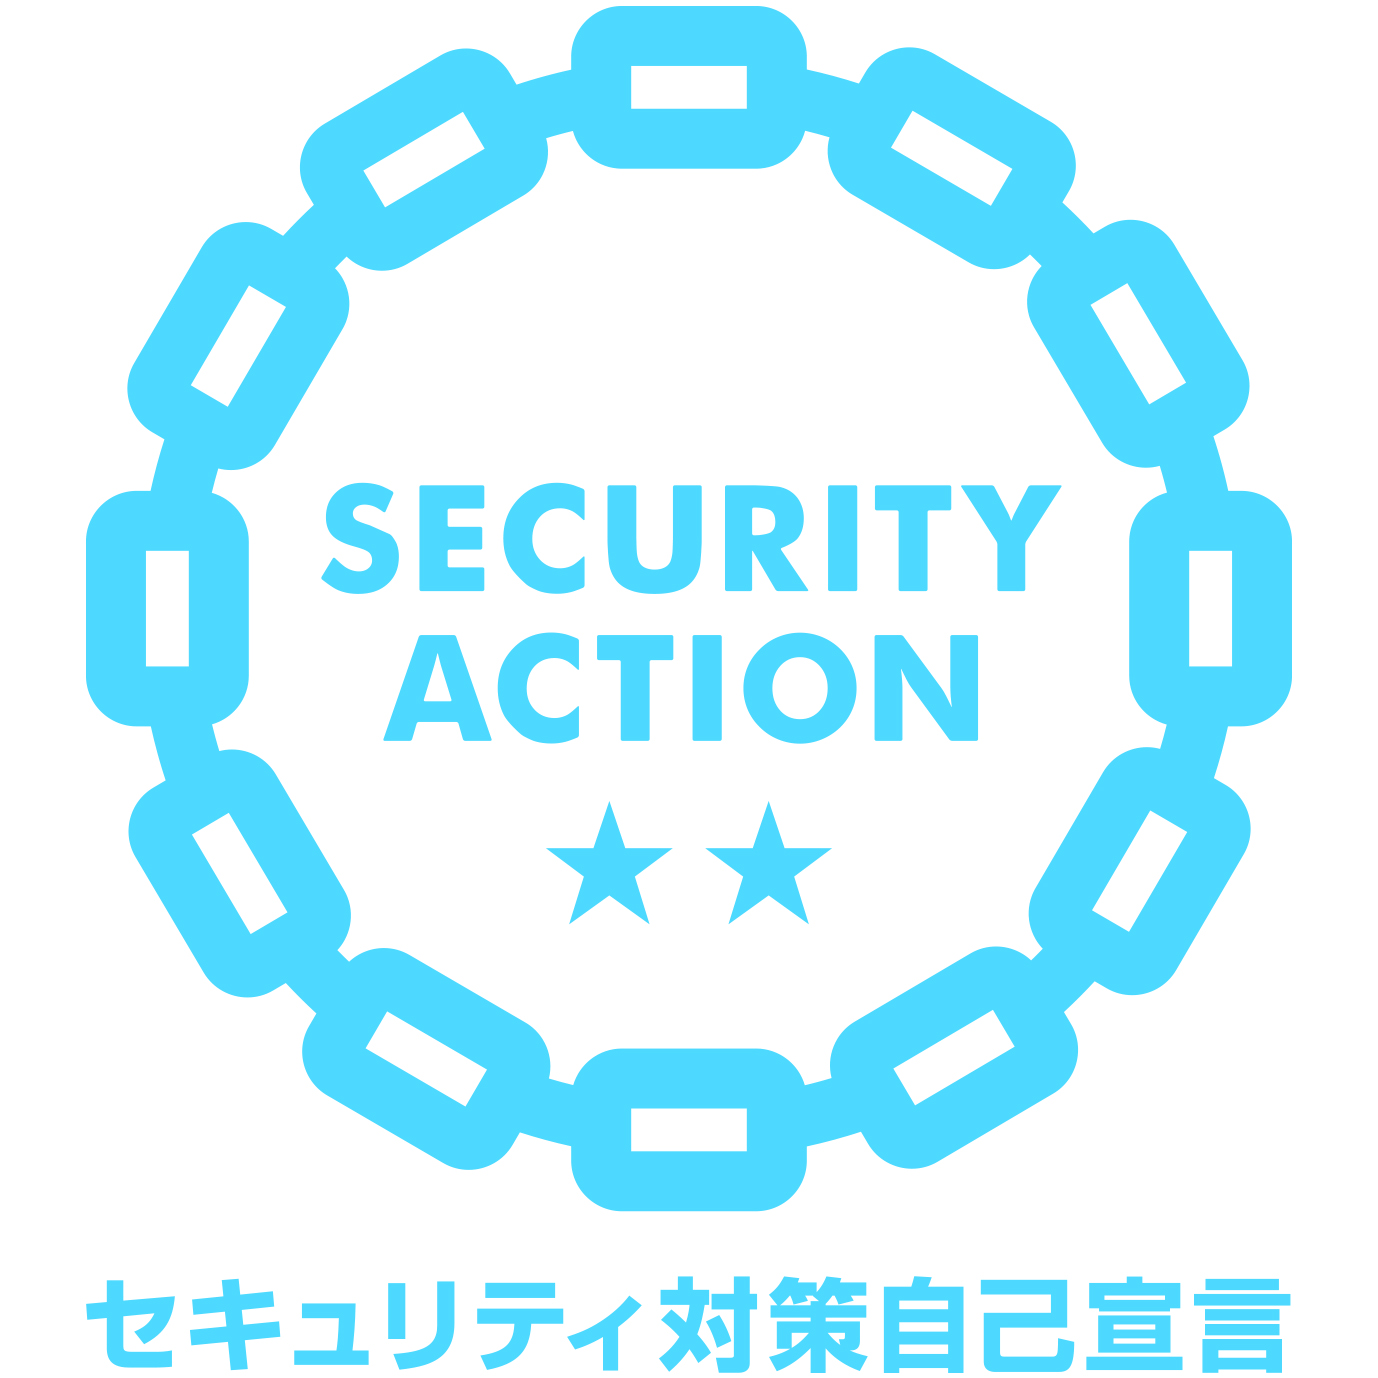 SECURITY ACTION宣言｜近江システムサービス